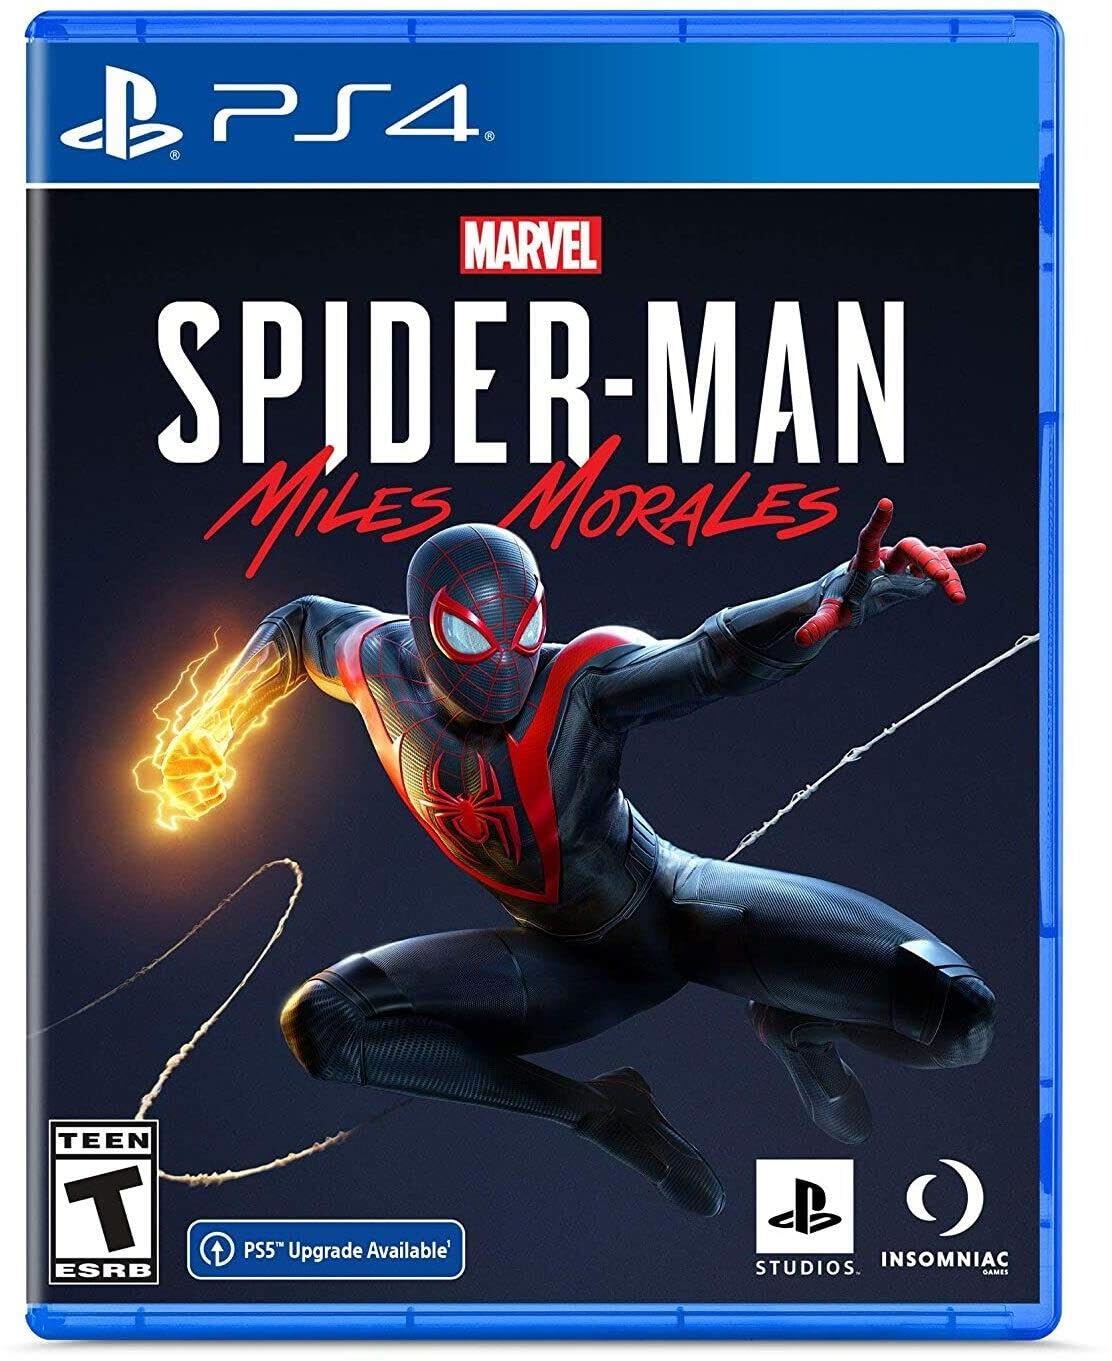 PS4-Spiderman-Miles-Morales-tech-junction-store